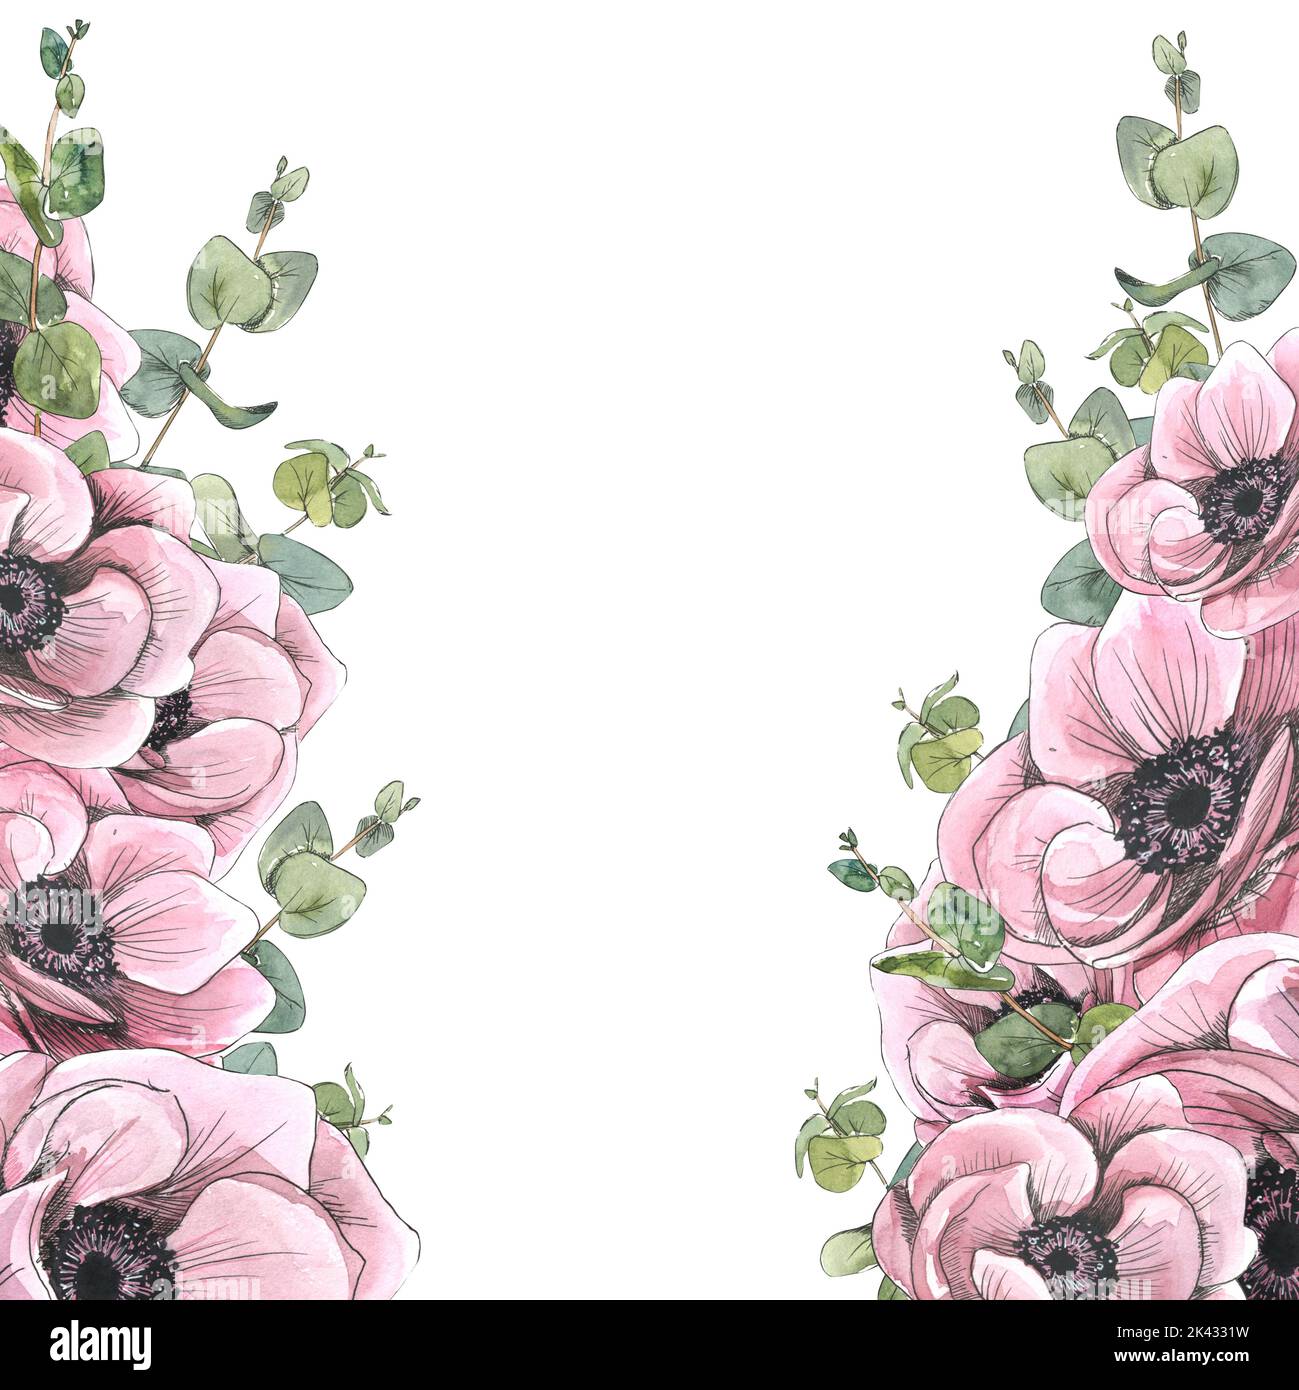 Beautiful pink anemone flowers. Watercolor illustration in sketch style with graphic elements. Frame from a large set of PARIS. For registration and Stock Photo